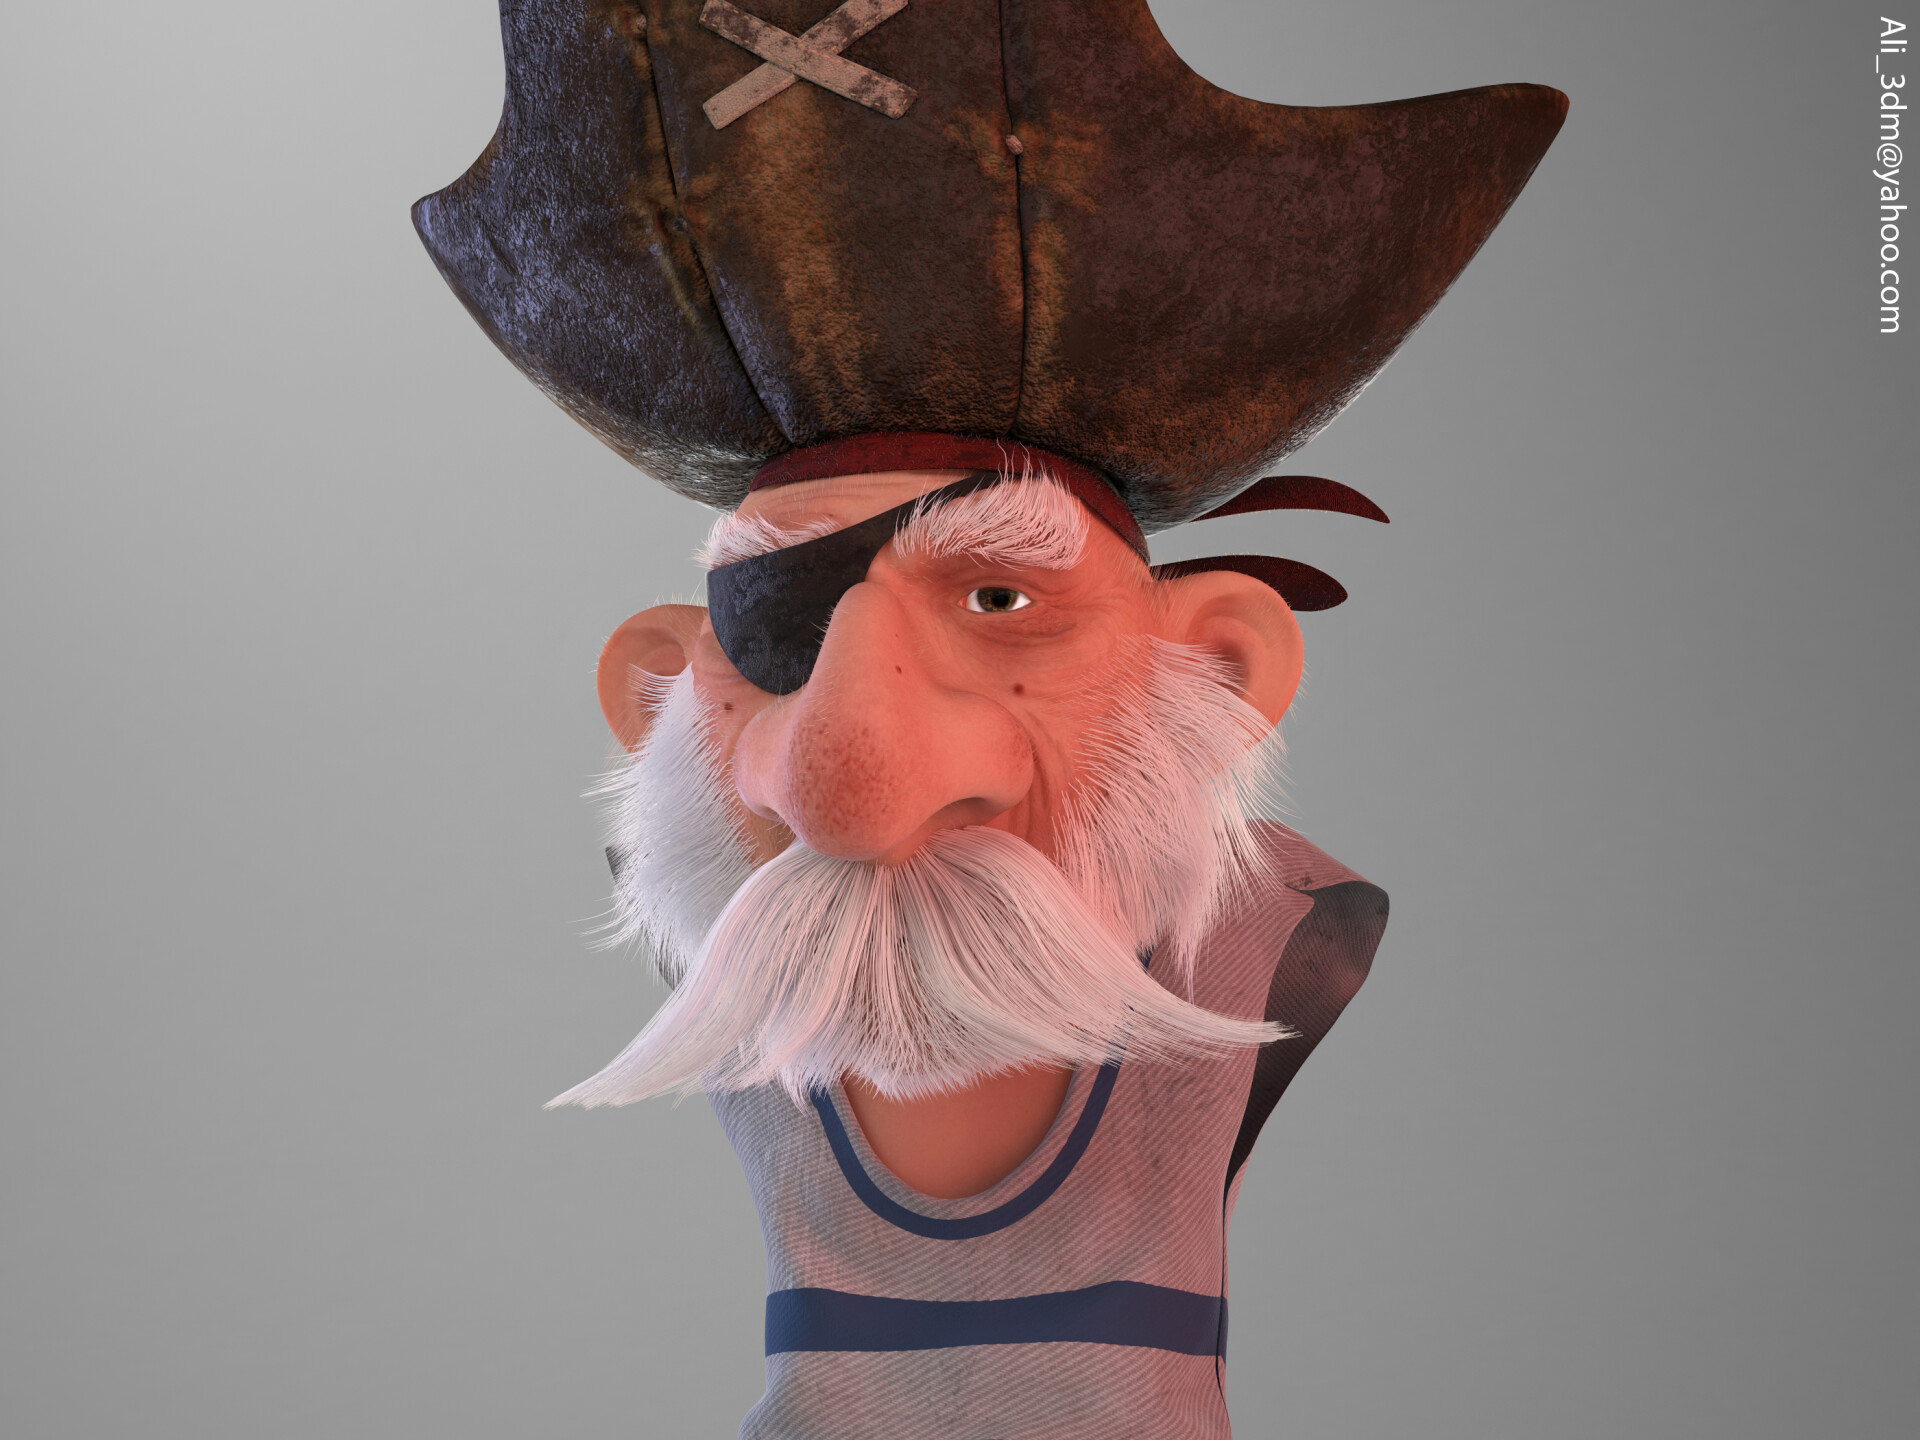 The Old Man Pirate - تصویر 7866